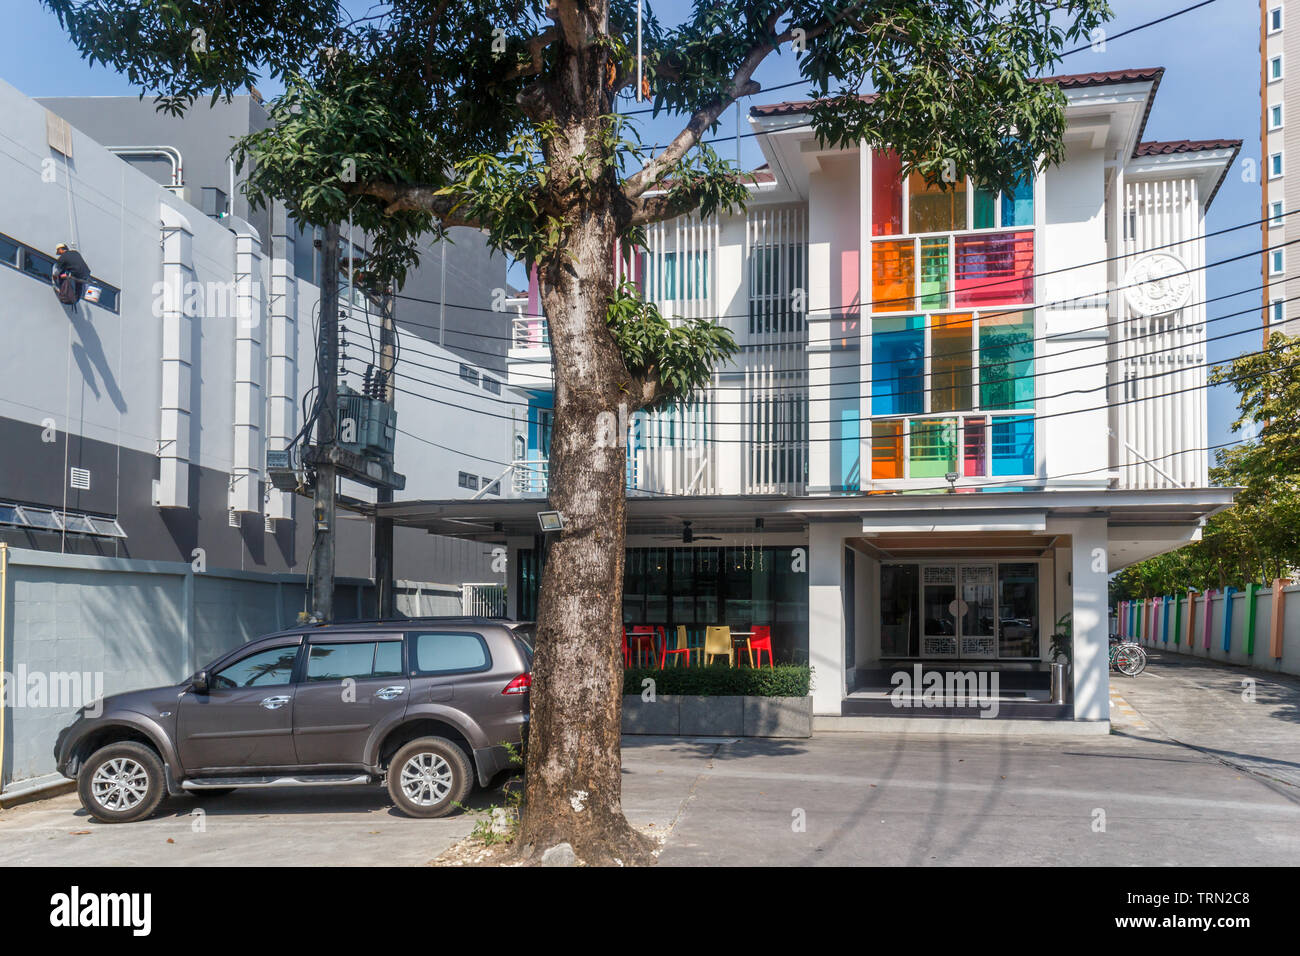 Phuket, Thailand - January 26th 2015: Car parked outside the Tint hotel. Many boutique hotels have sprung up in the town. Stock Photo